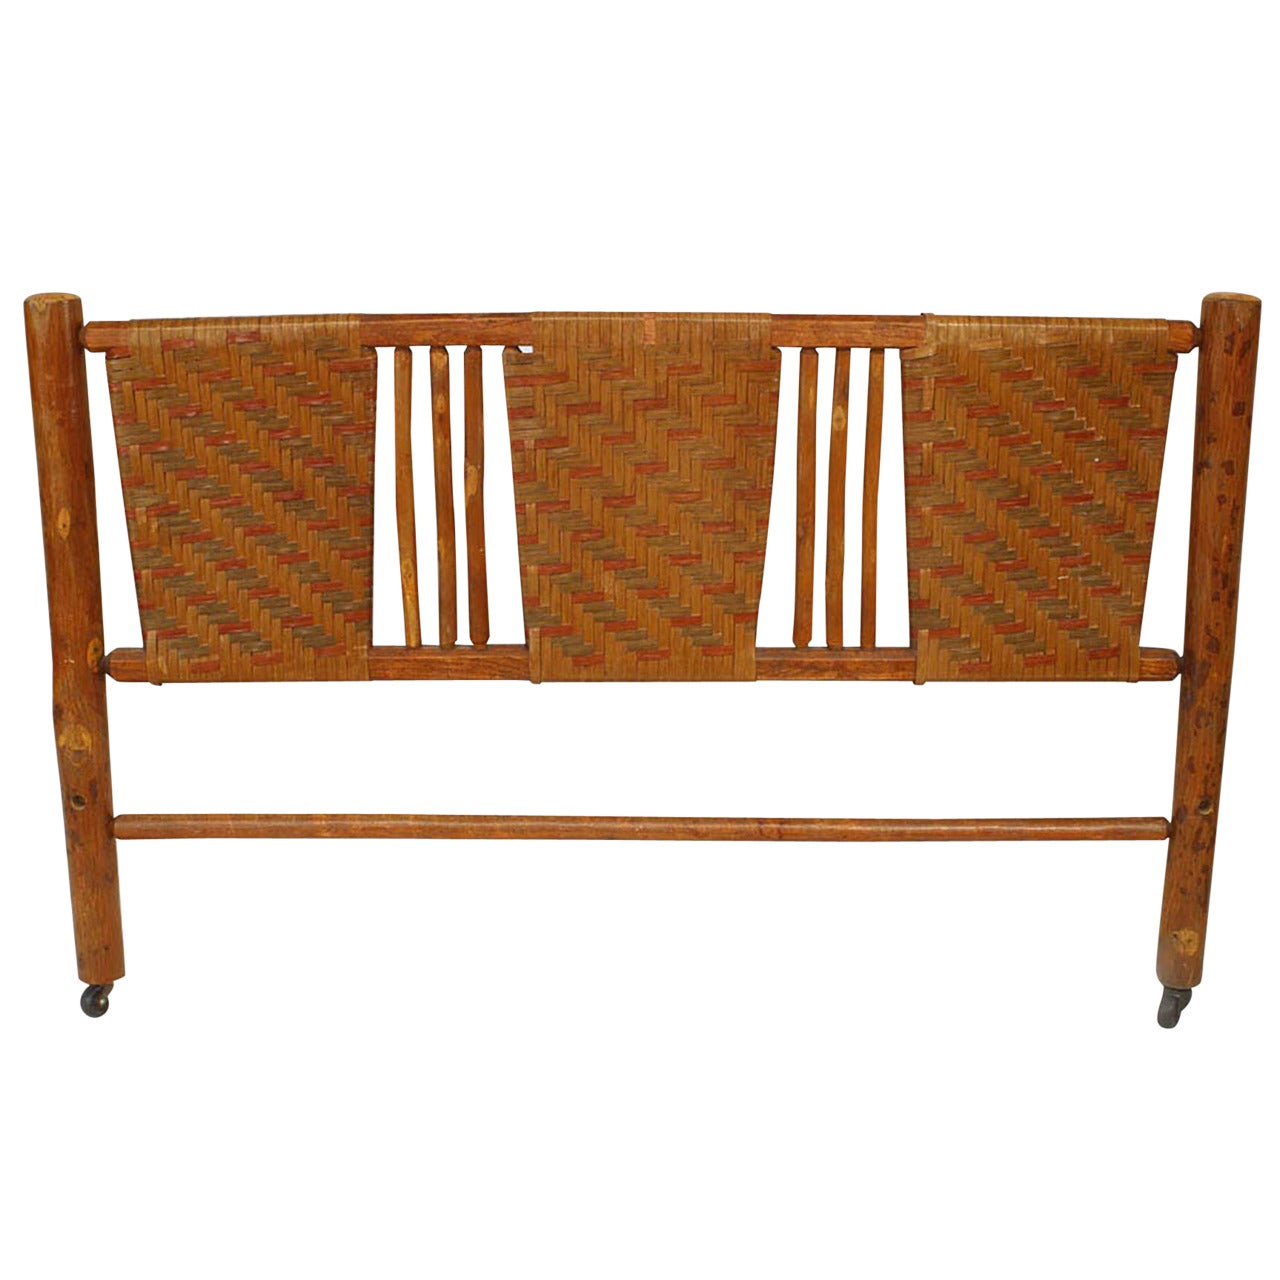 Rustic Old HIckory Full Headboard For Sale